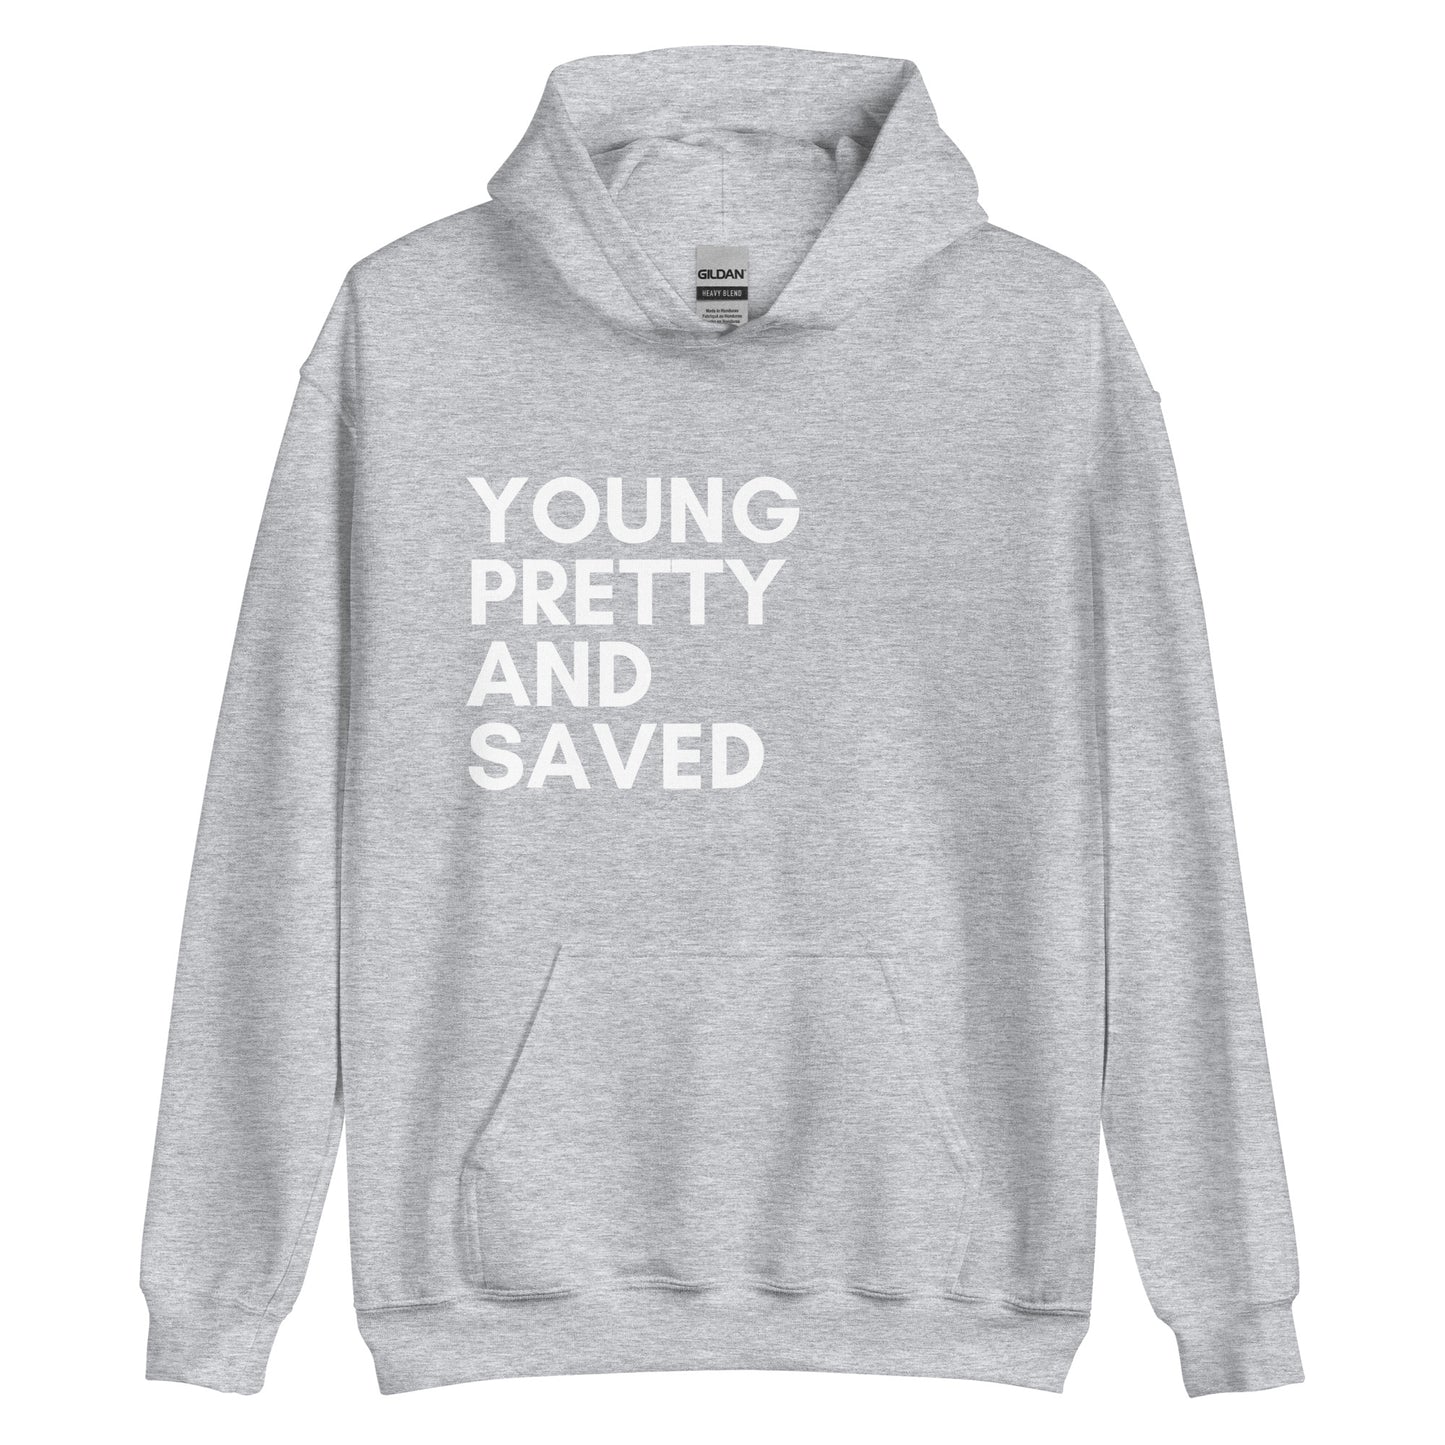 "Young Pretty & Saved" Hoodie